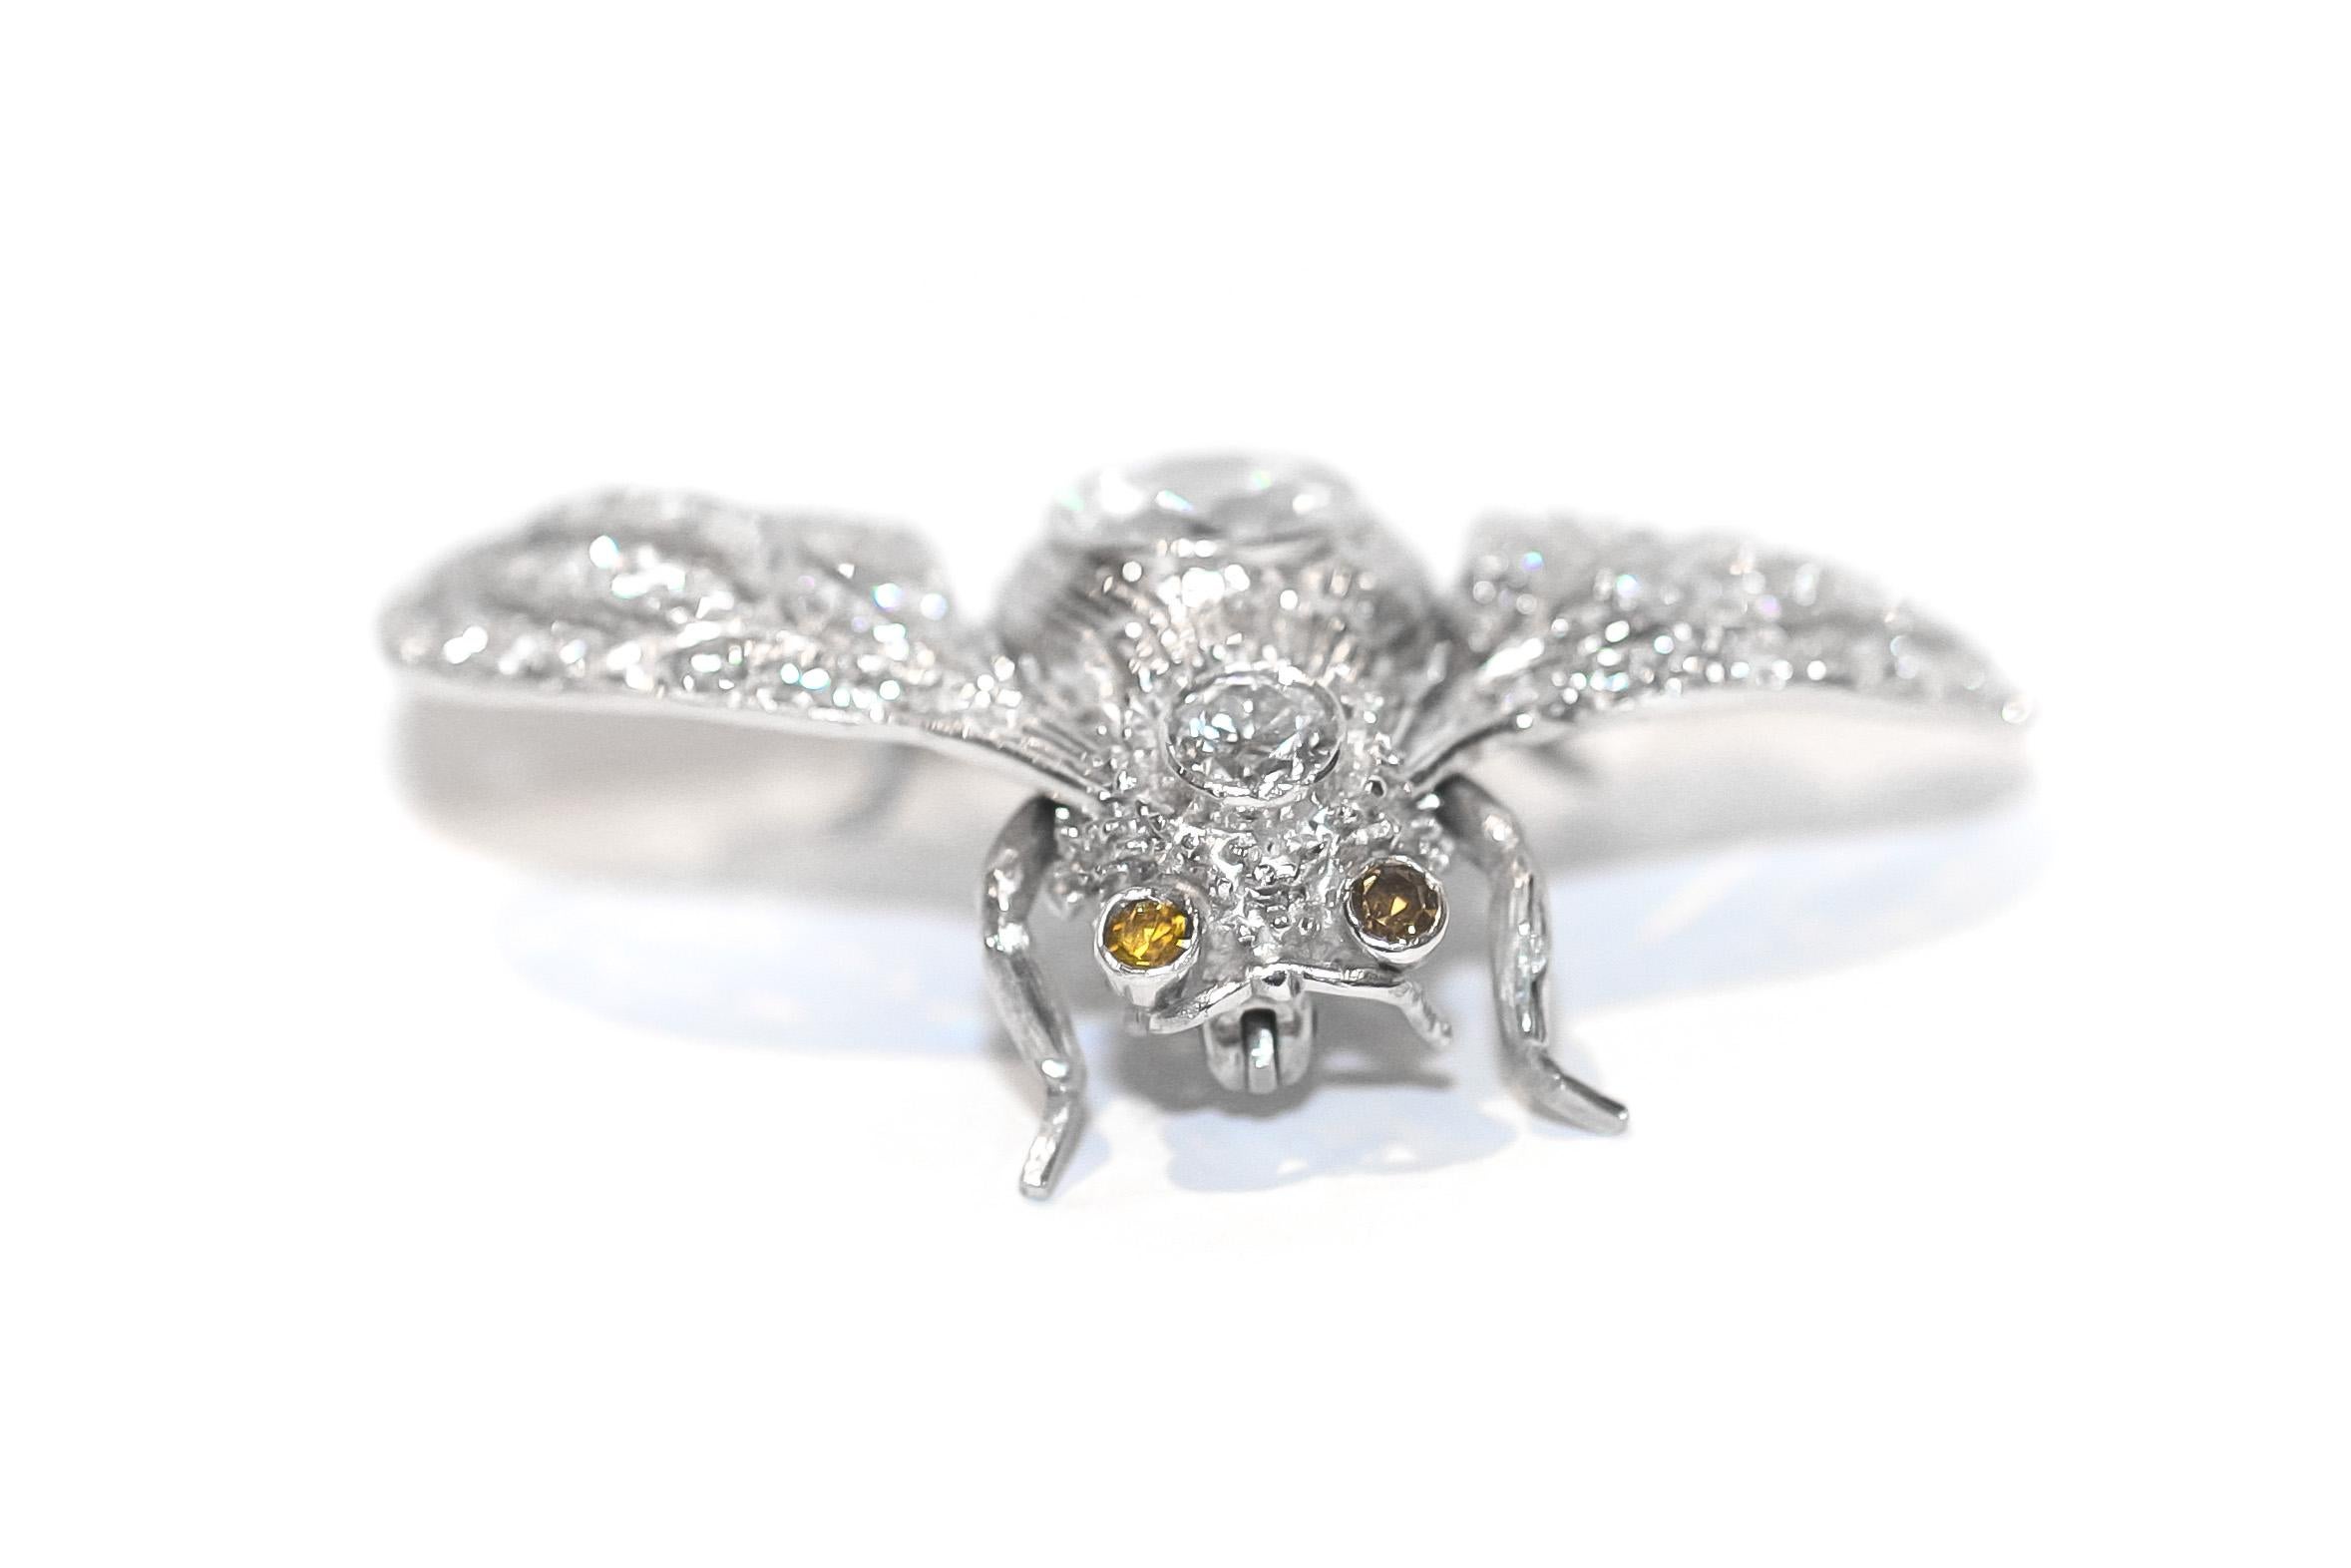 Art Deco style Bumble Bee Brooch crafted in Platinum with Round Brilliant weighing 1.25 carats in the center, accented with round old-cut diamonds. 